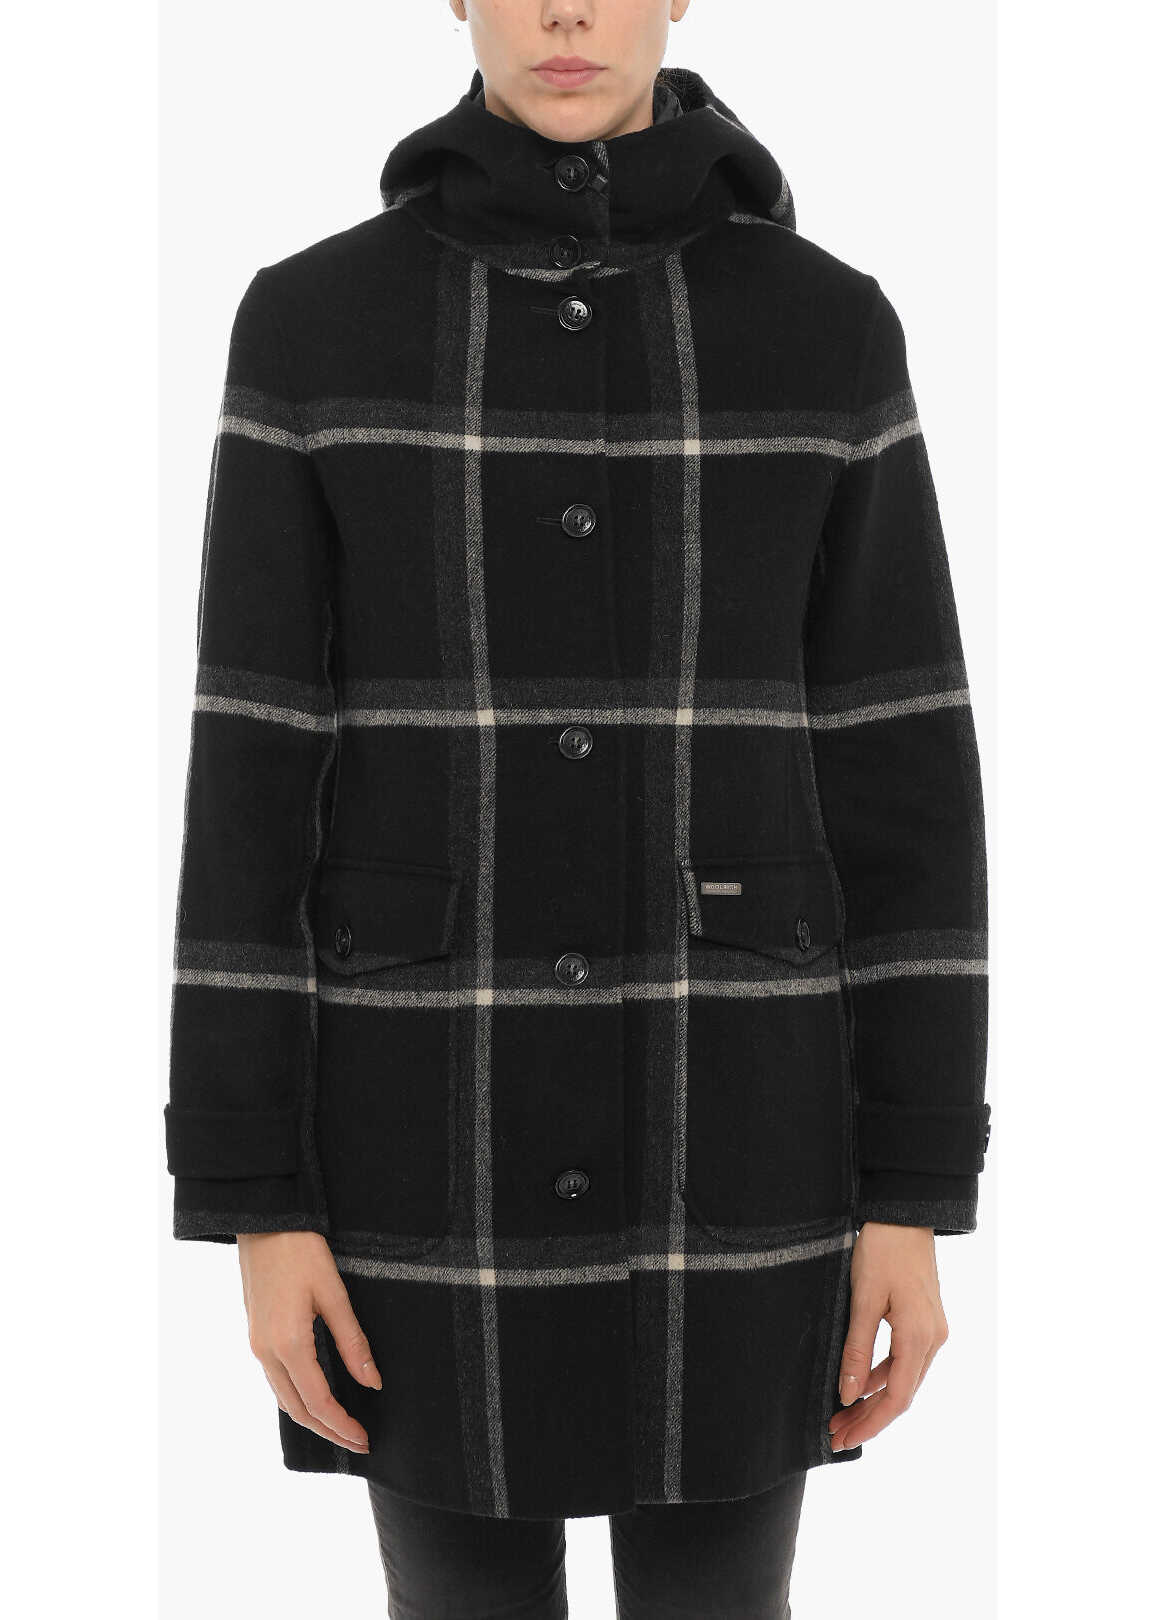 Woolrich Plaid Motif Marcy Coat With Removable Sleeveless Down Jacket Black